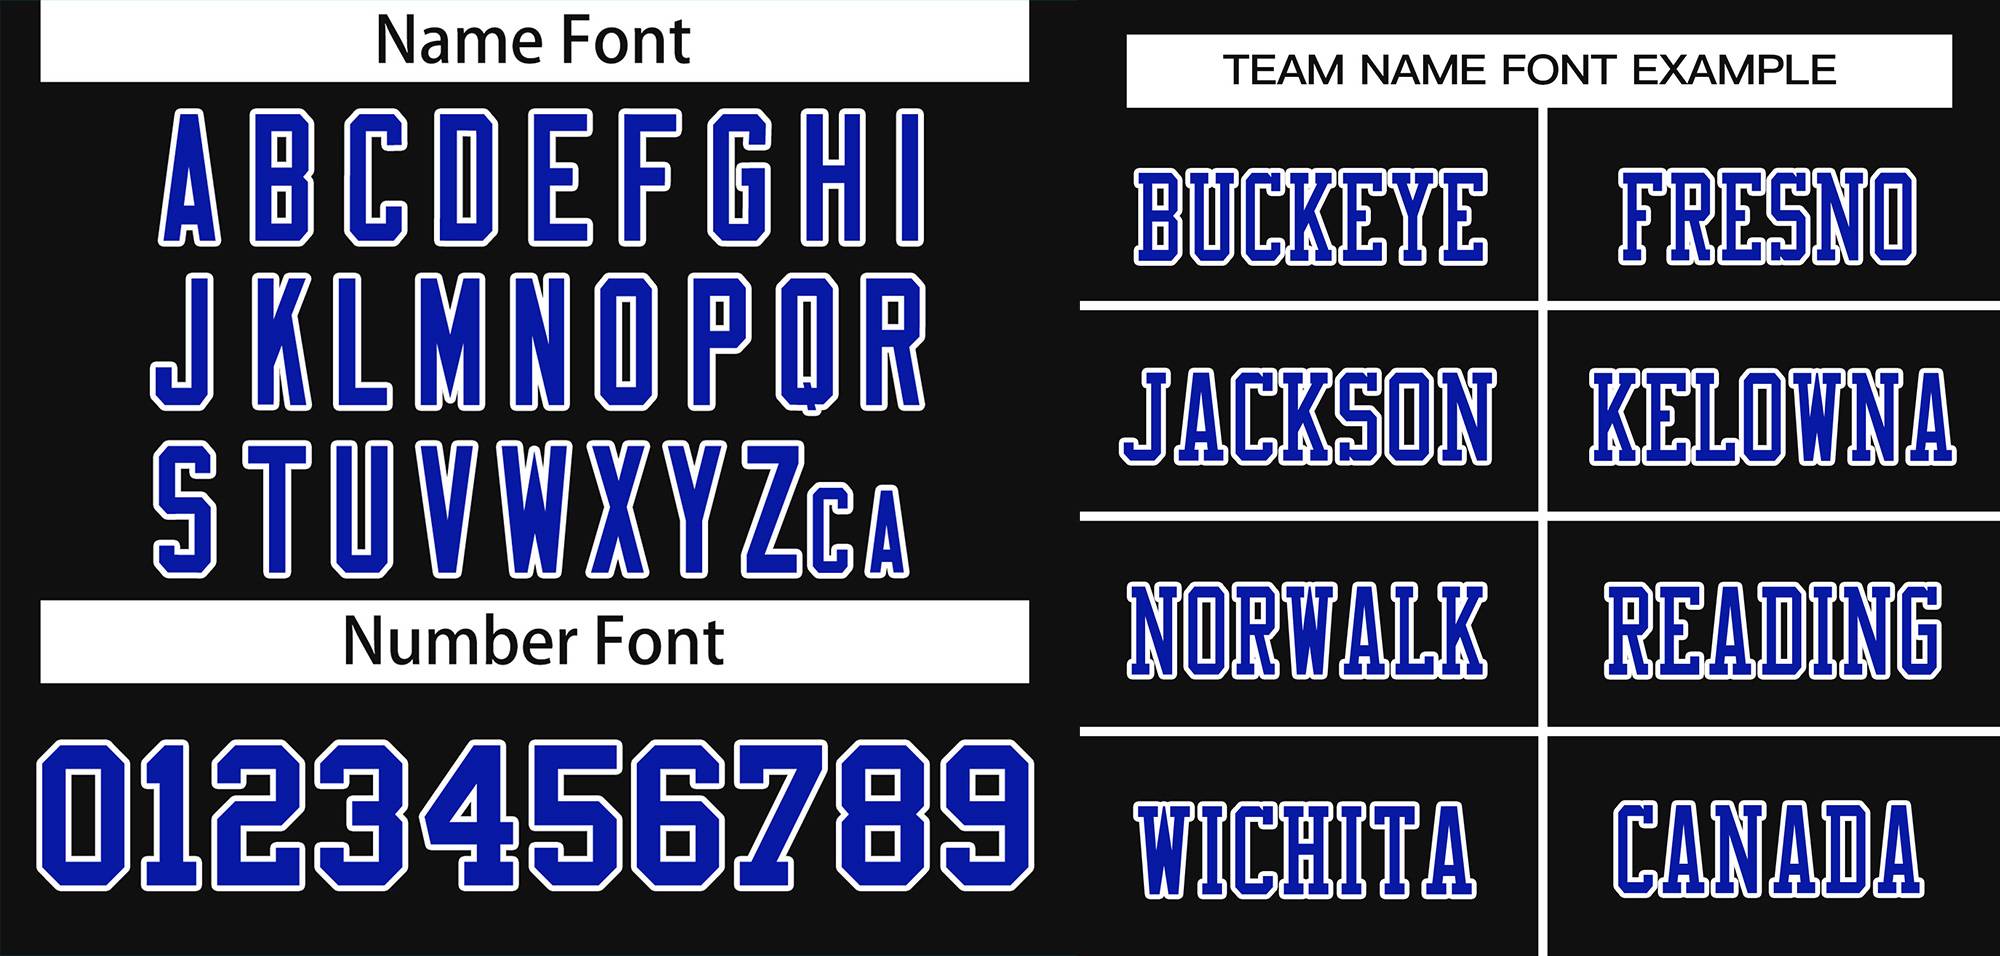 customizable black football jerseys name and number font